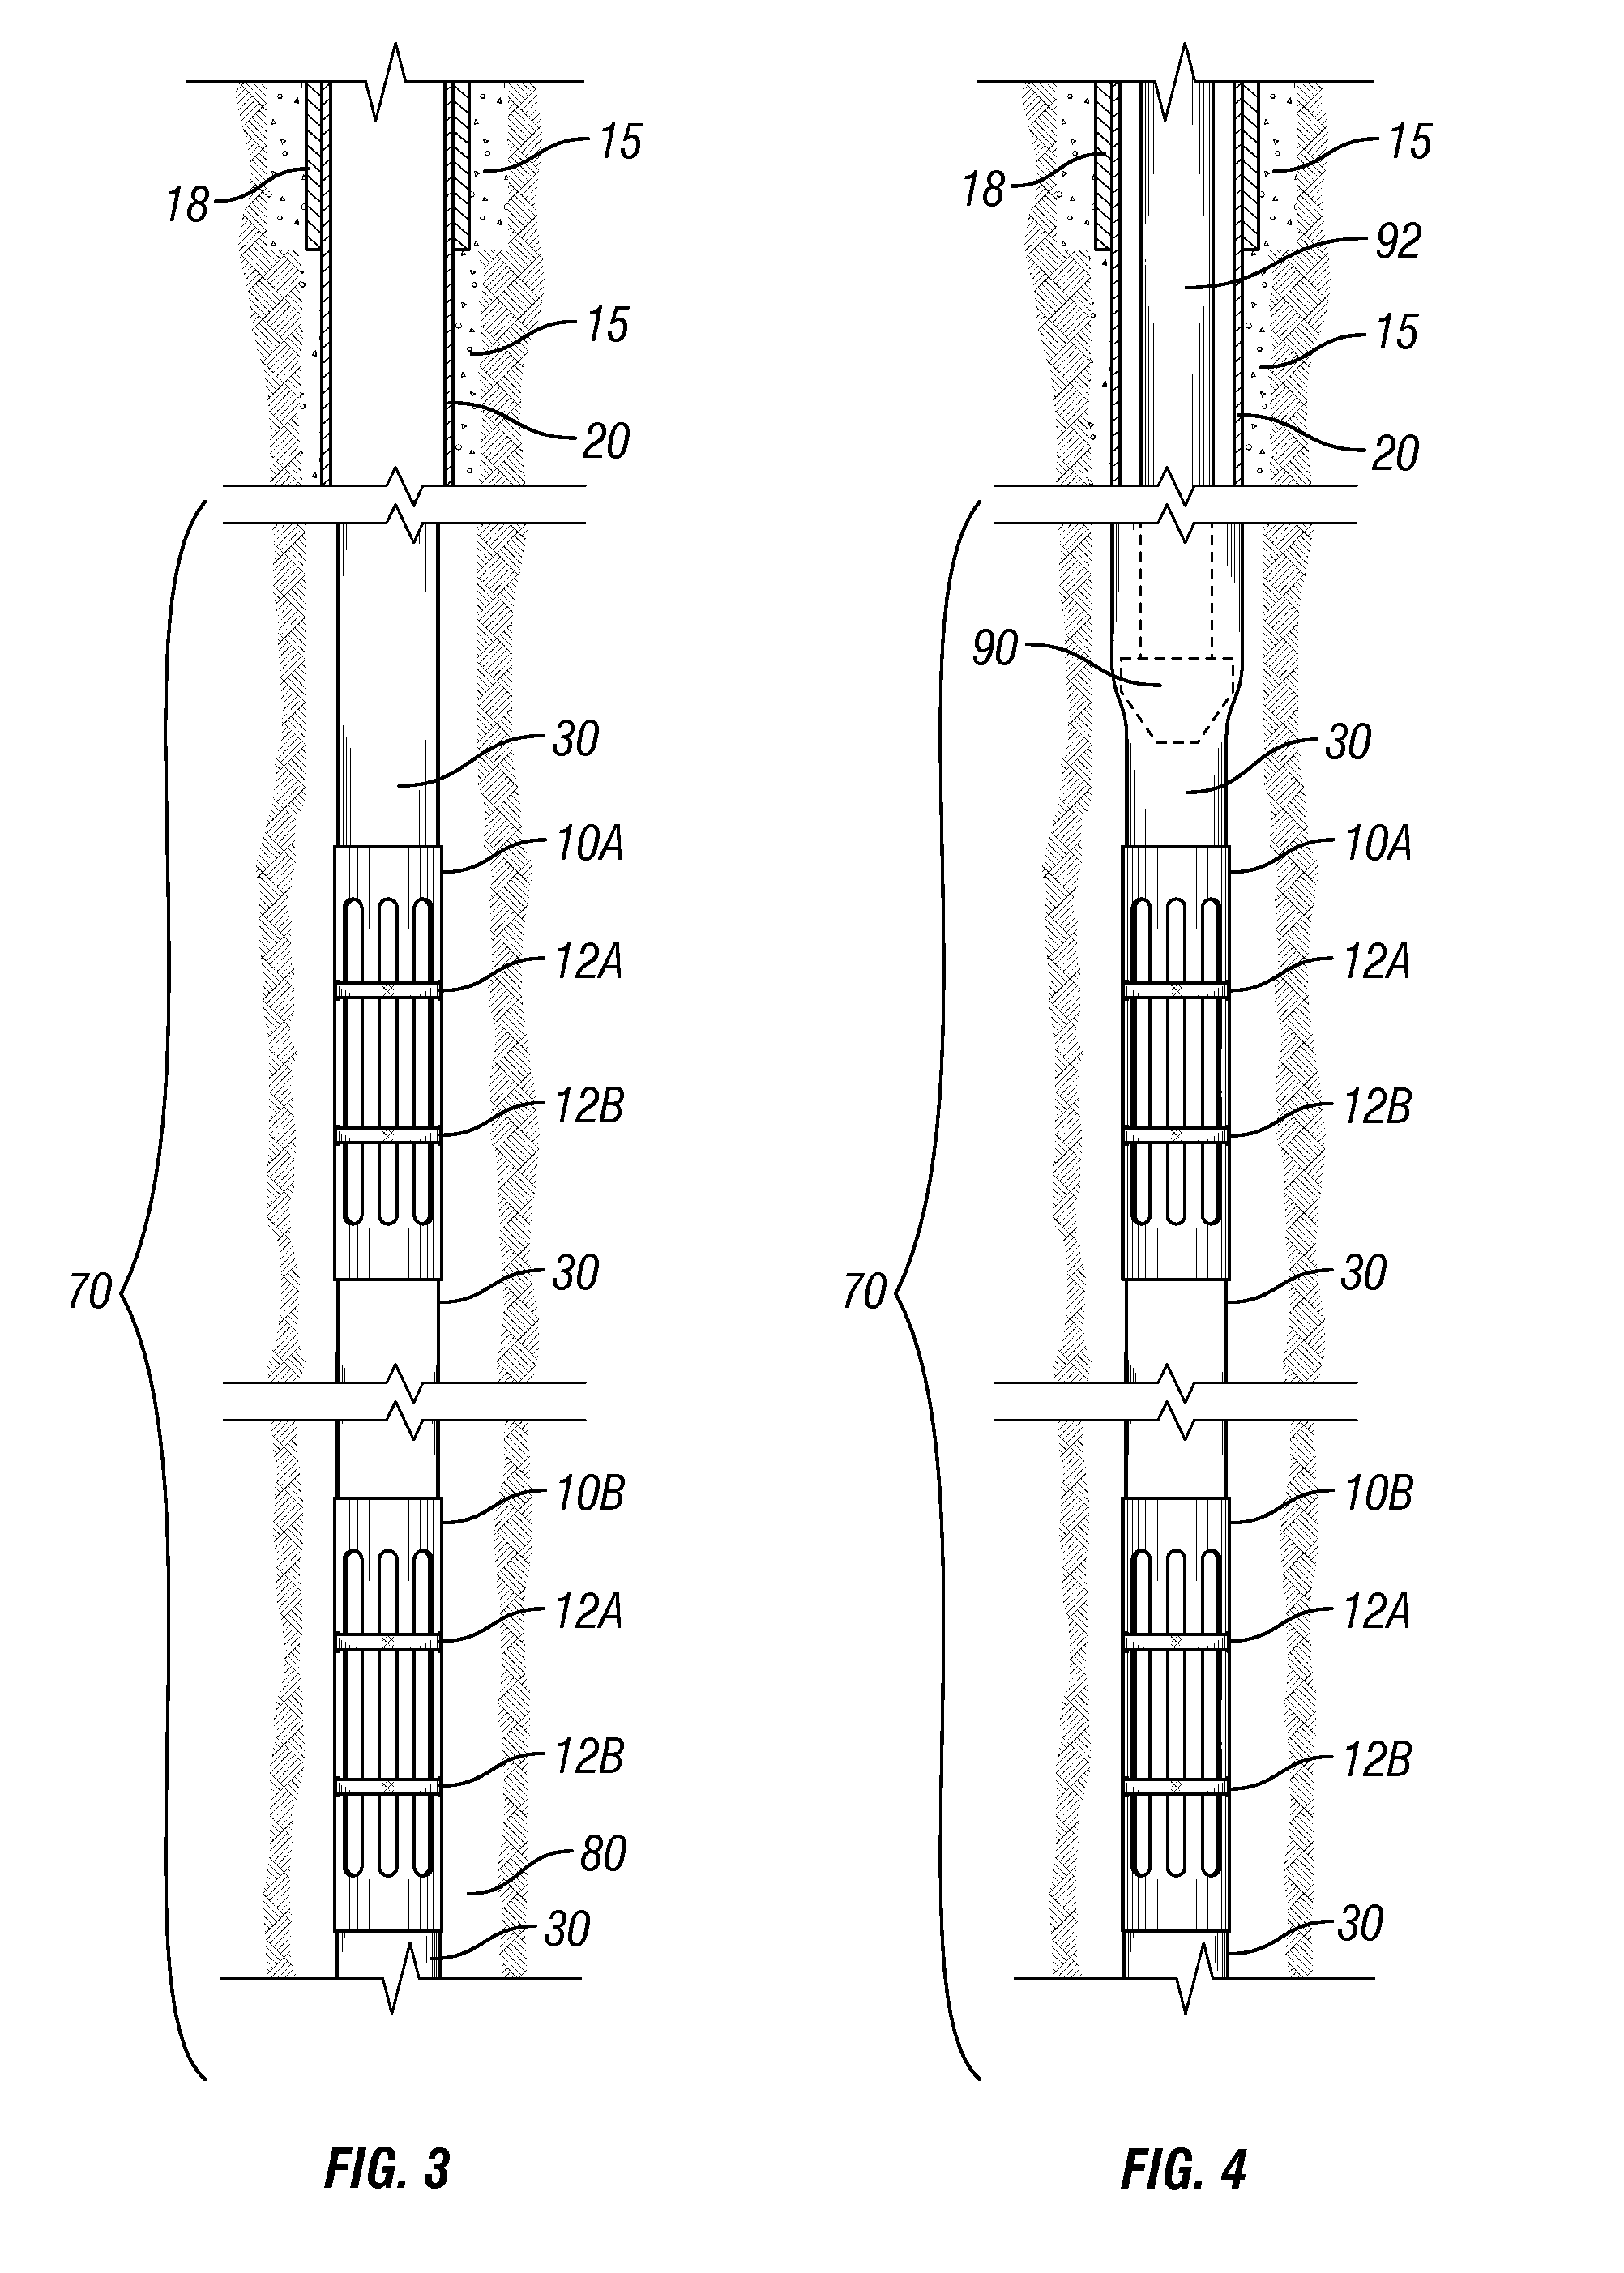 Apparatus for and Method of Deploying a Centralizer Installed on an Expandable Casing String